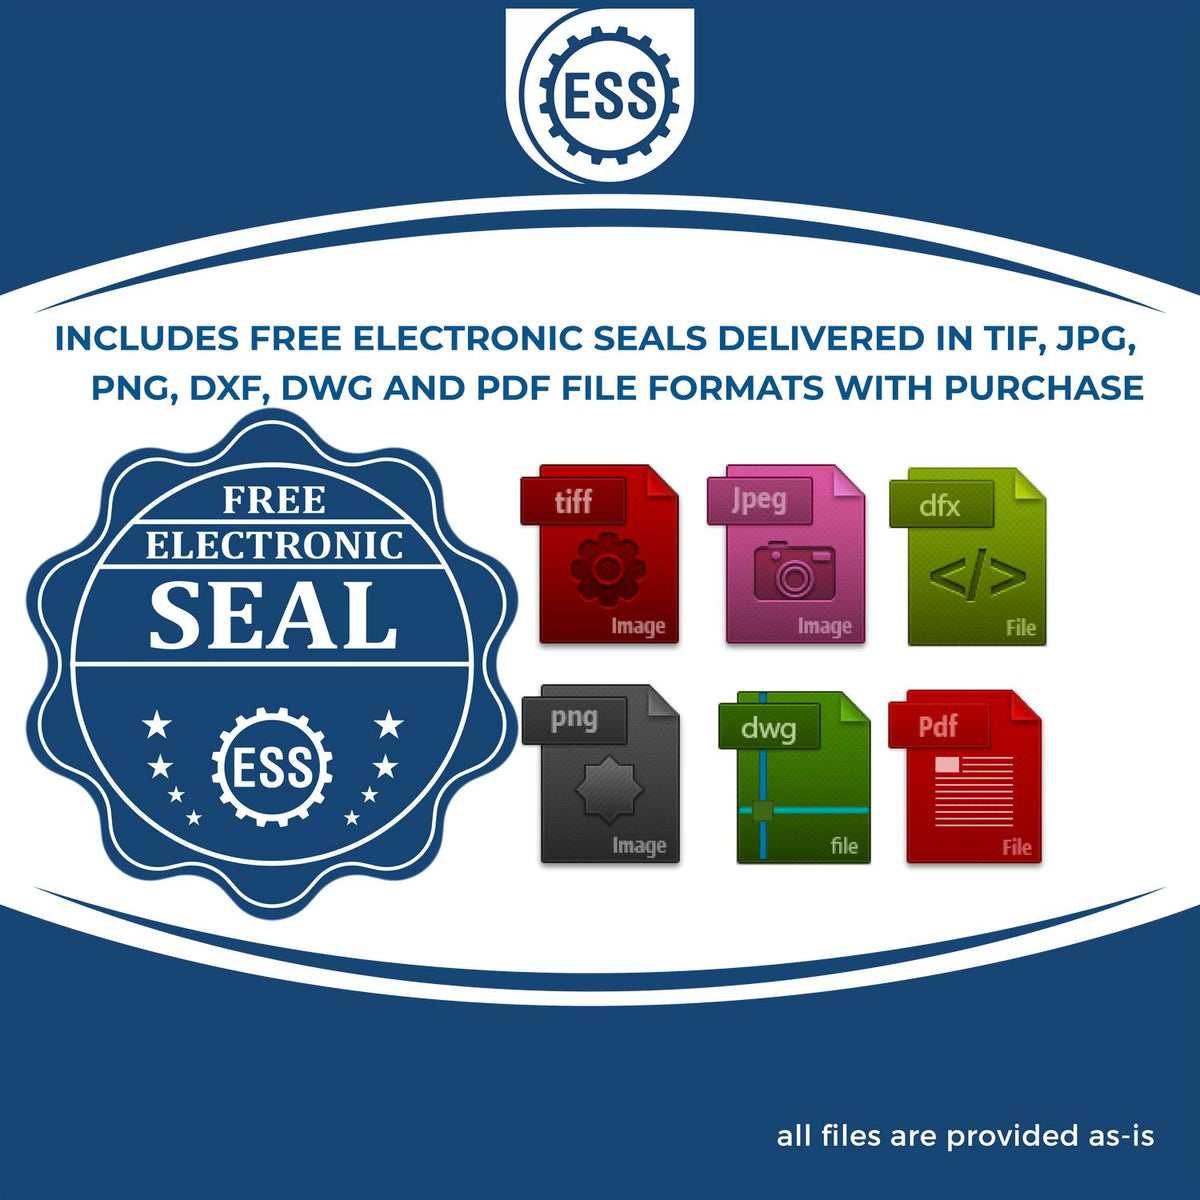 An infographic for the free electronic seal for the Kansas Professional Engineer Seal Stamp illustrating the different file type icons such as DXF, DWG, TIF, JPG and PNG.